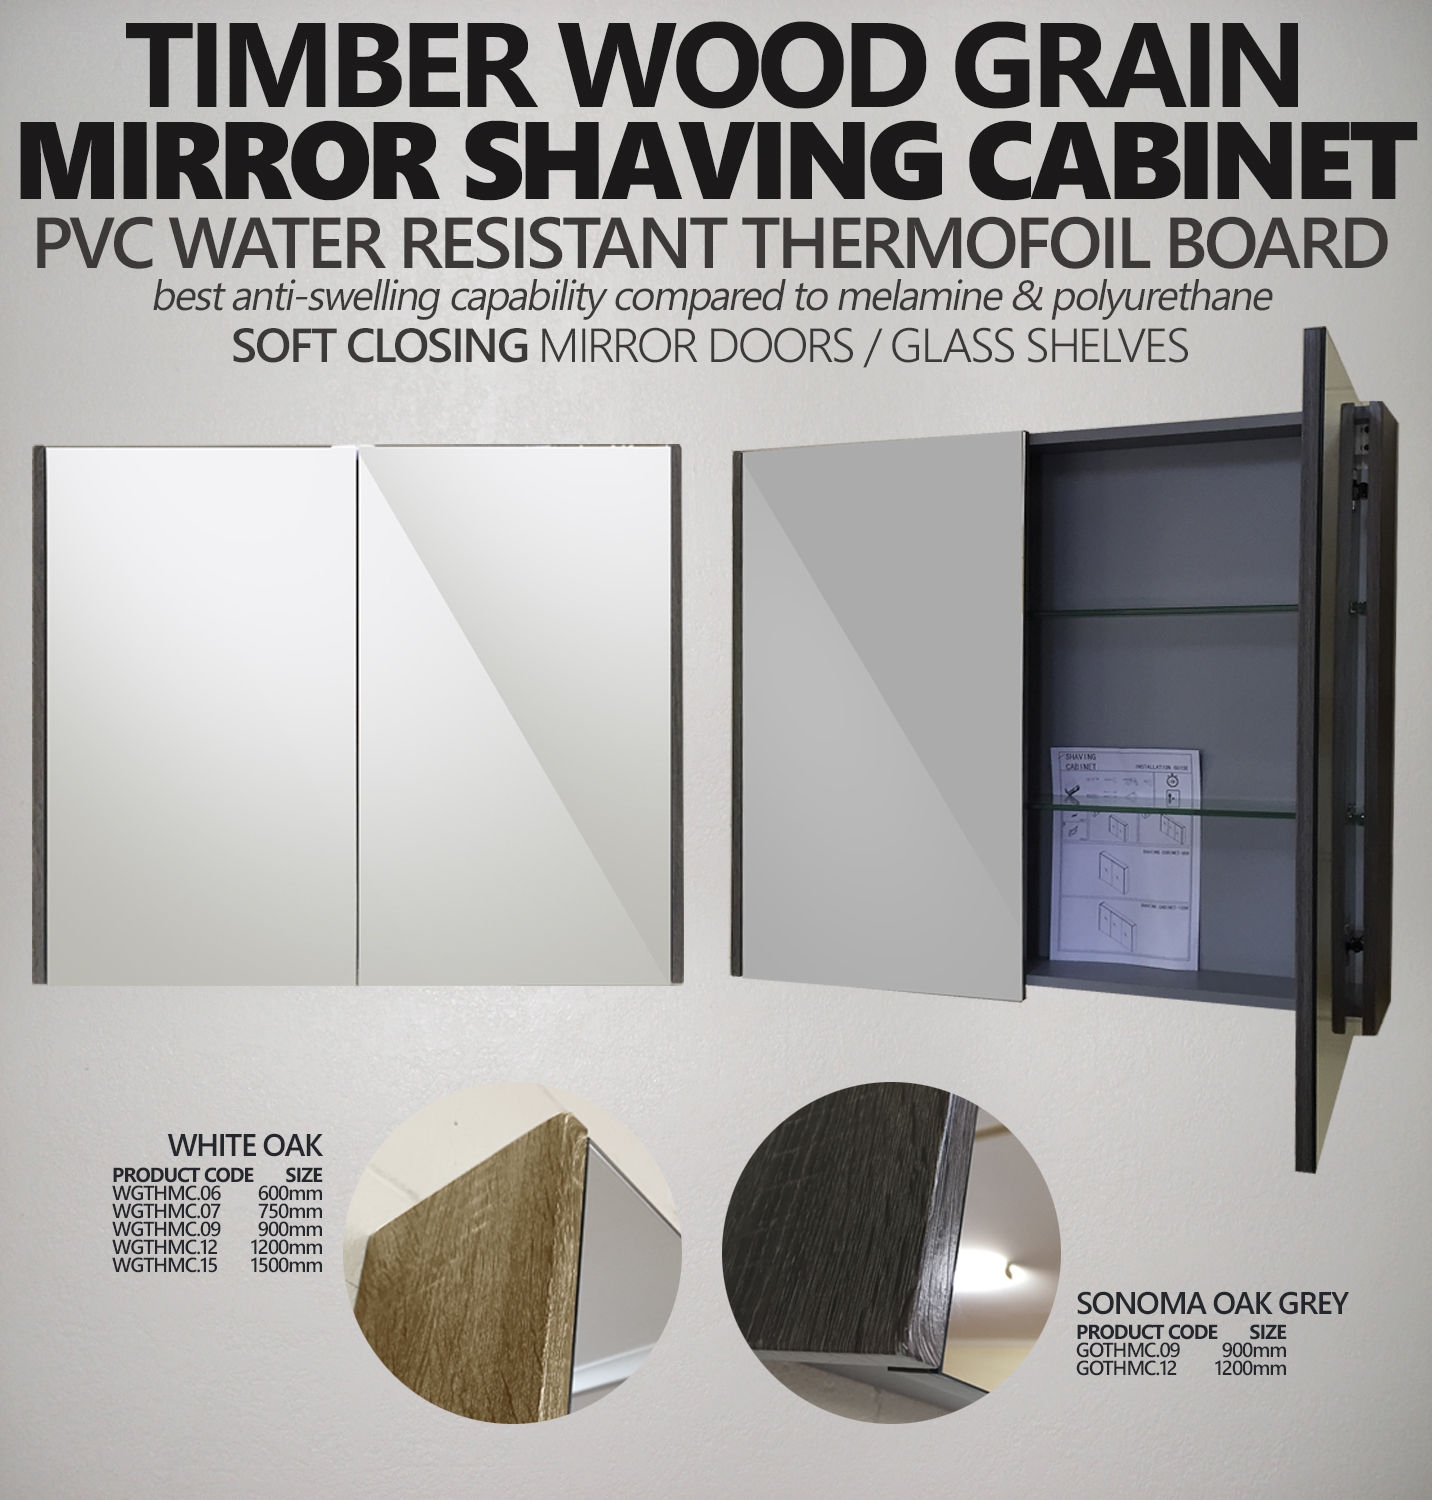 Shave Pvc Thermal Foil Mirror Shaving Cabinet With Timber Wood